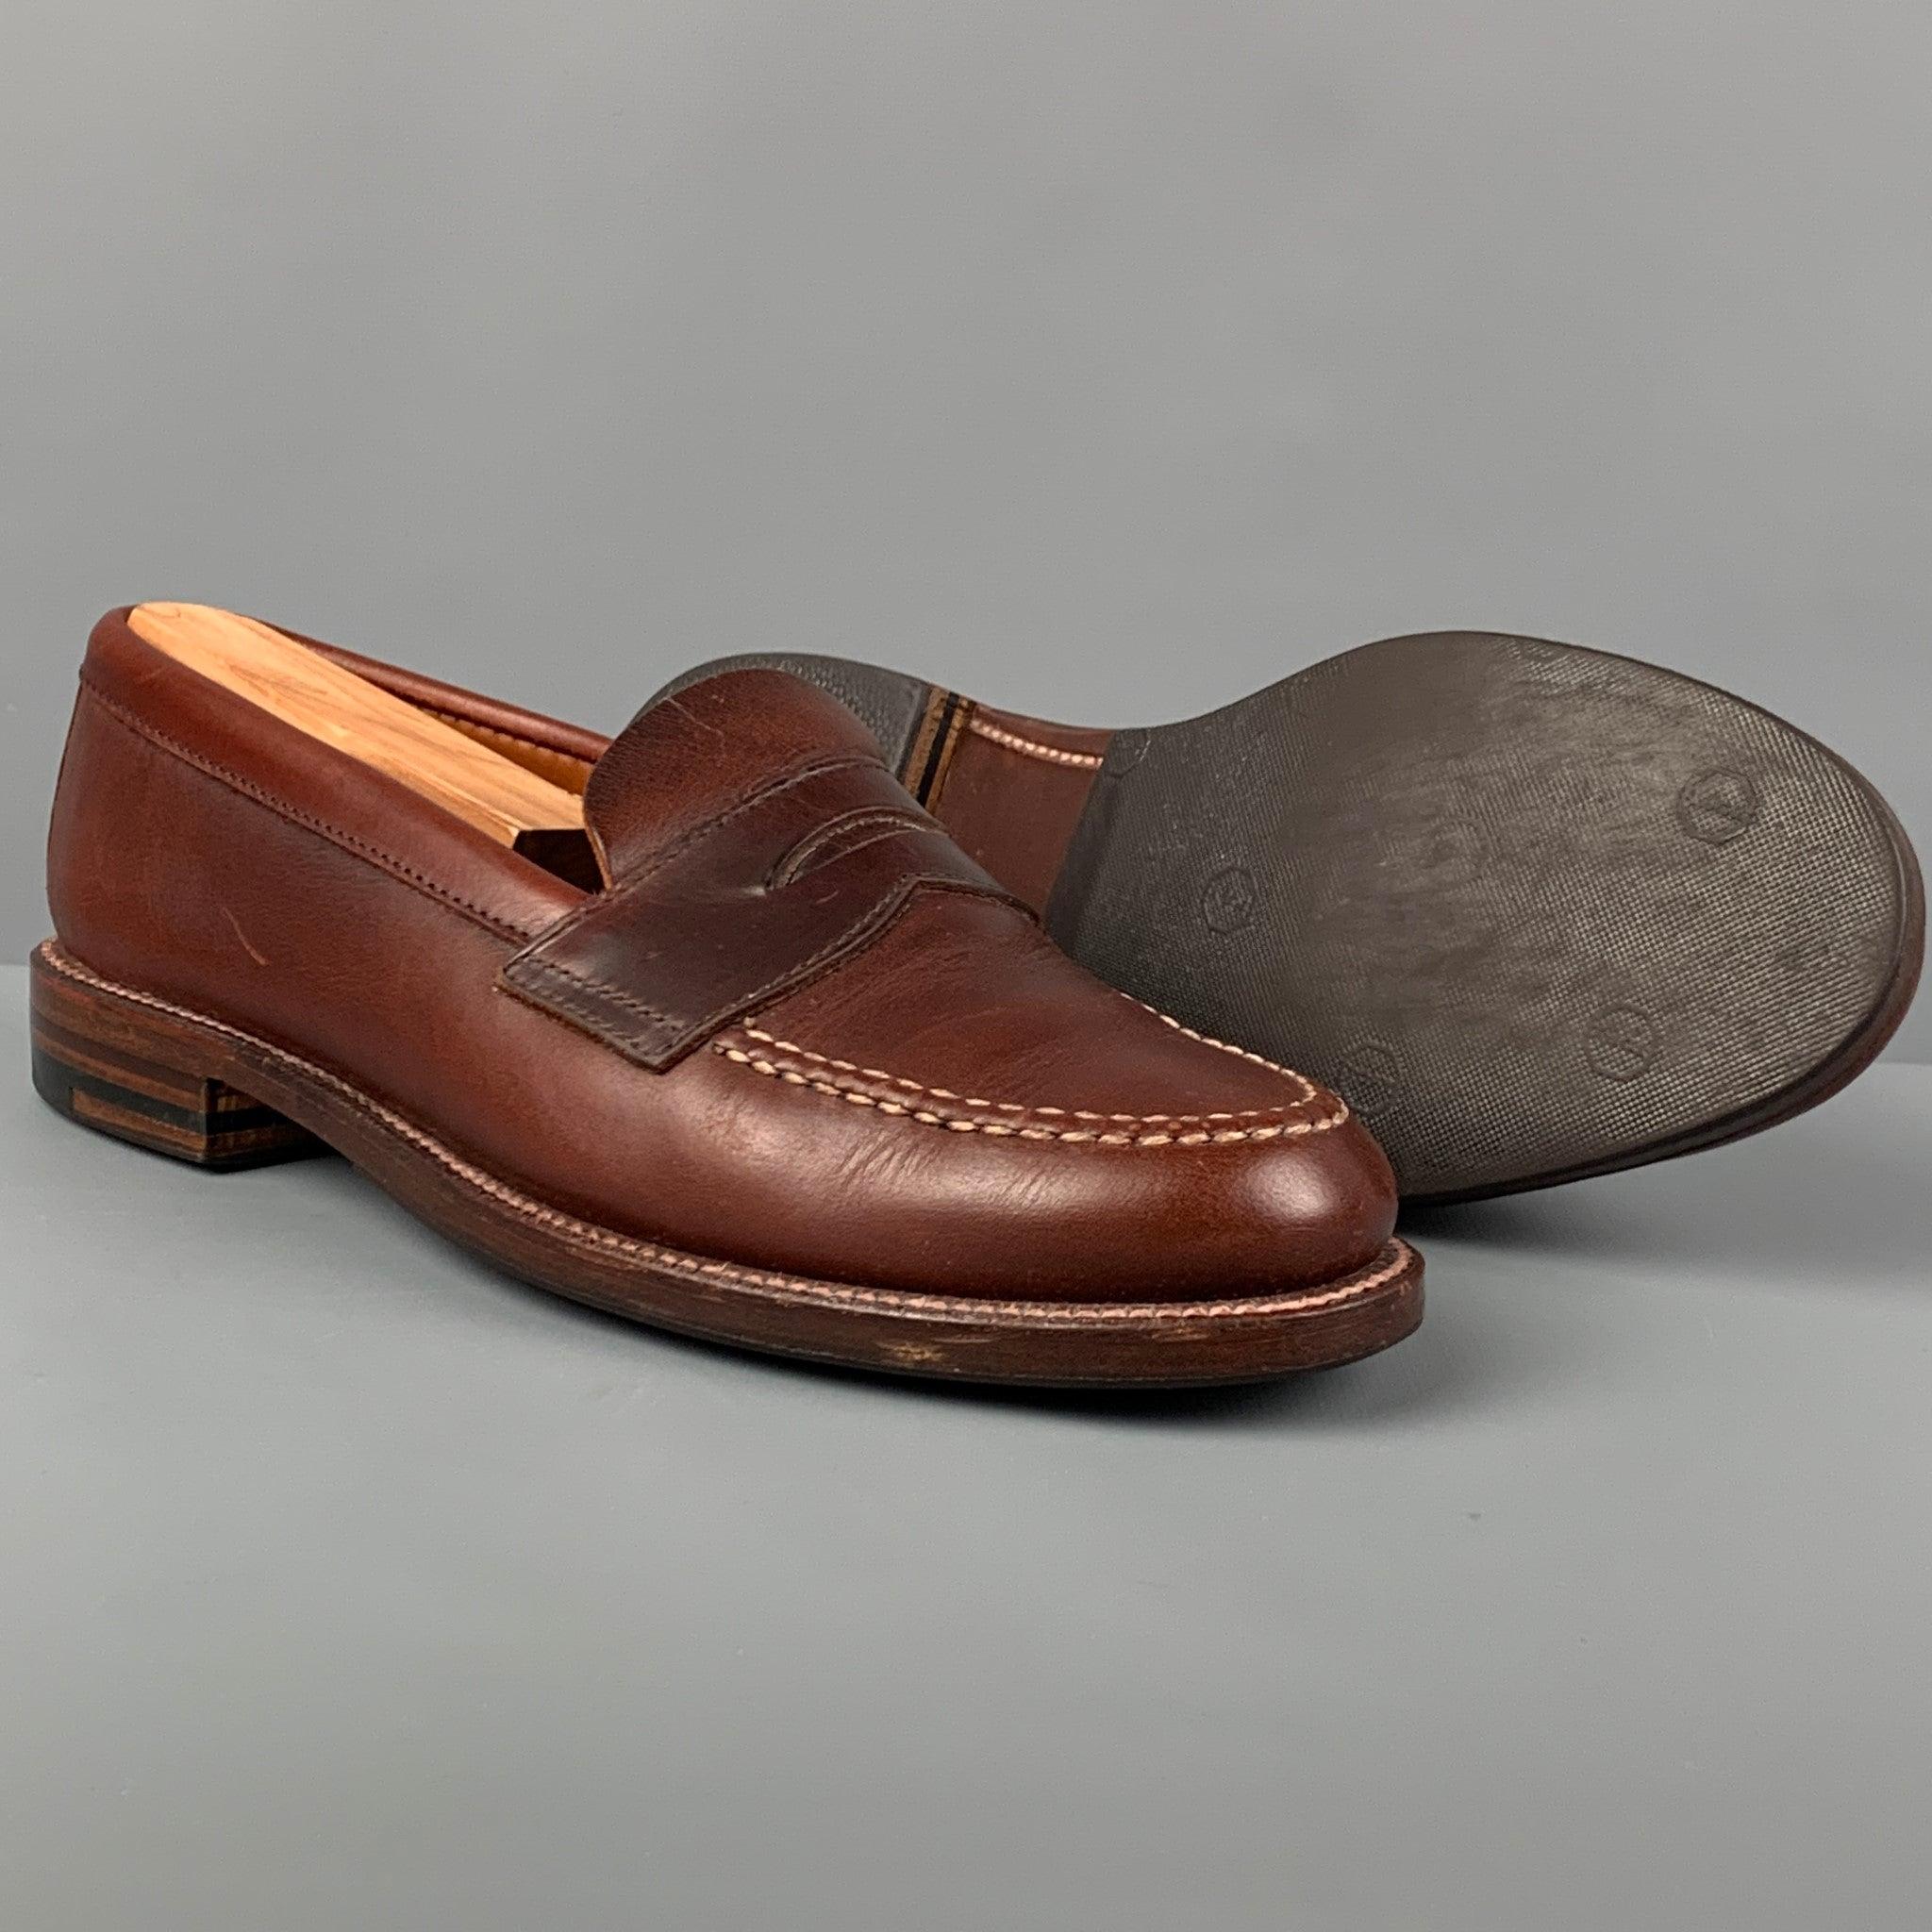 ALDEN Size 6.5 Brown Leather Penny Loafers In Good Condition For Sale In San Francisco, CA